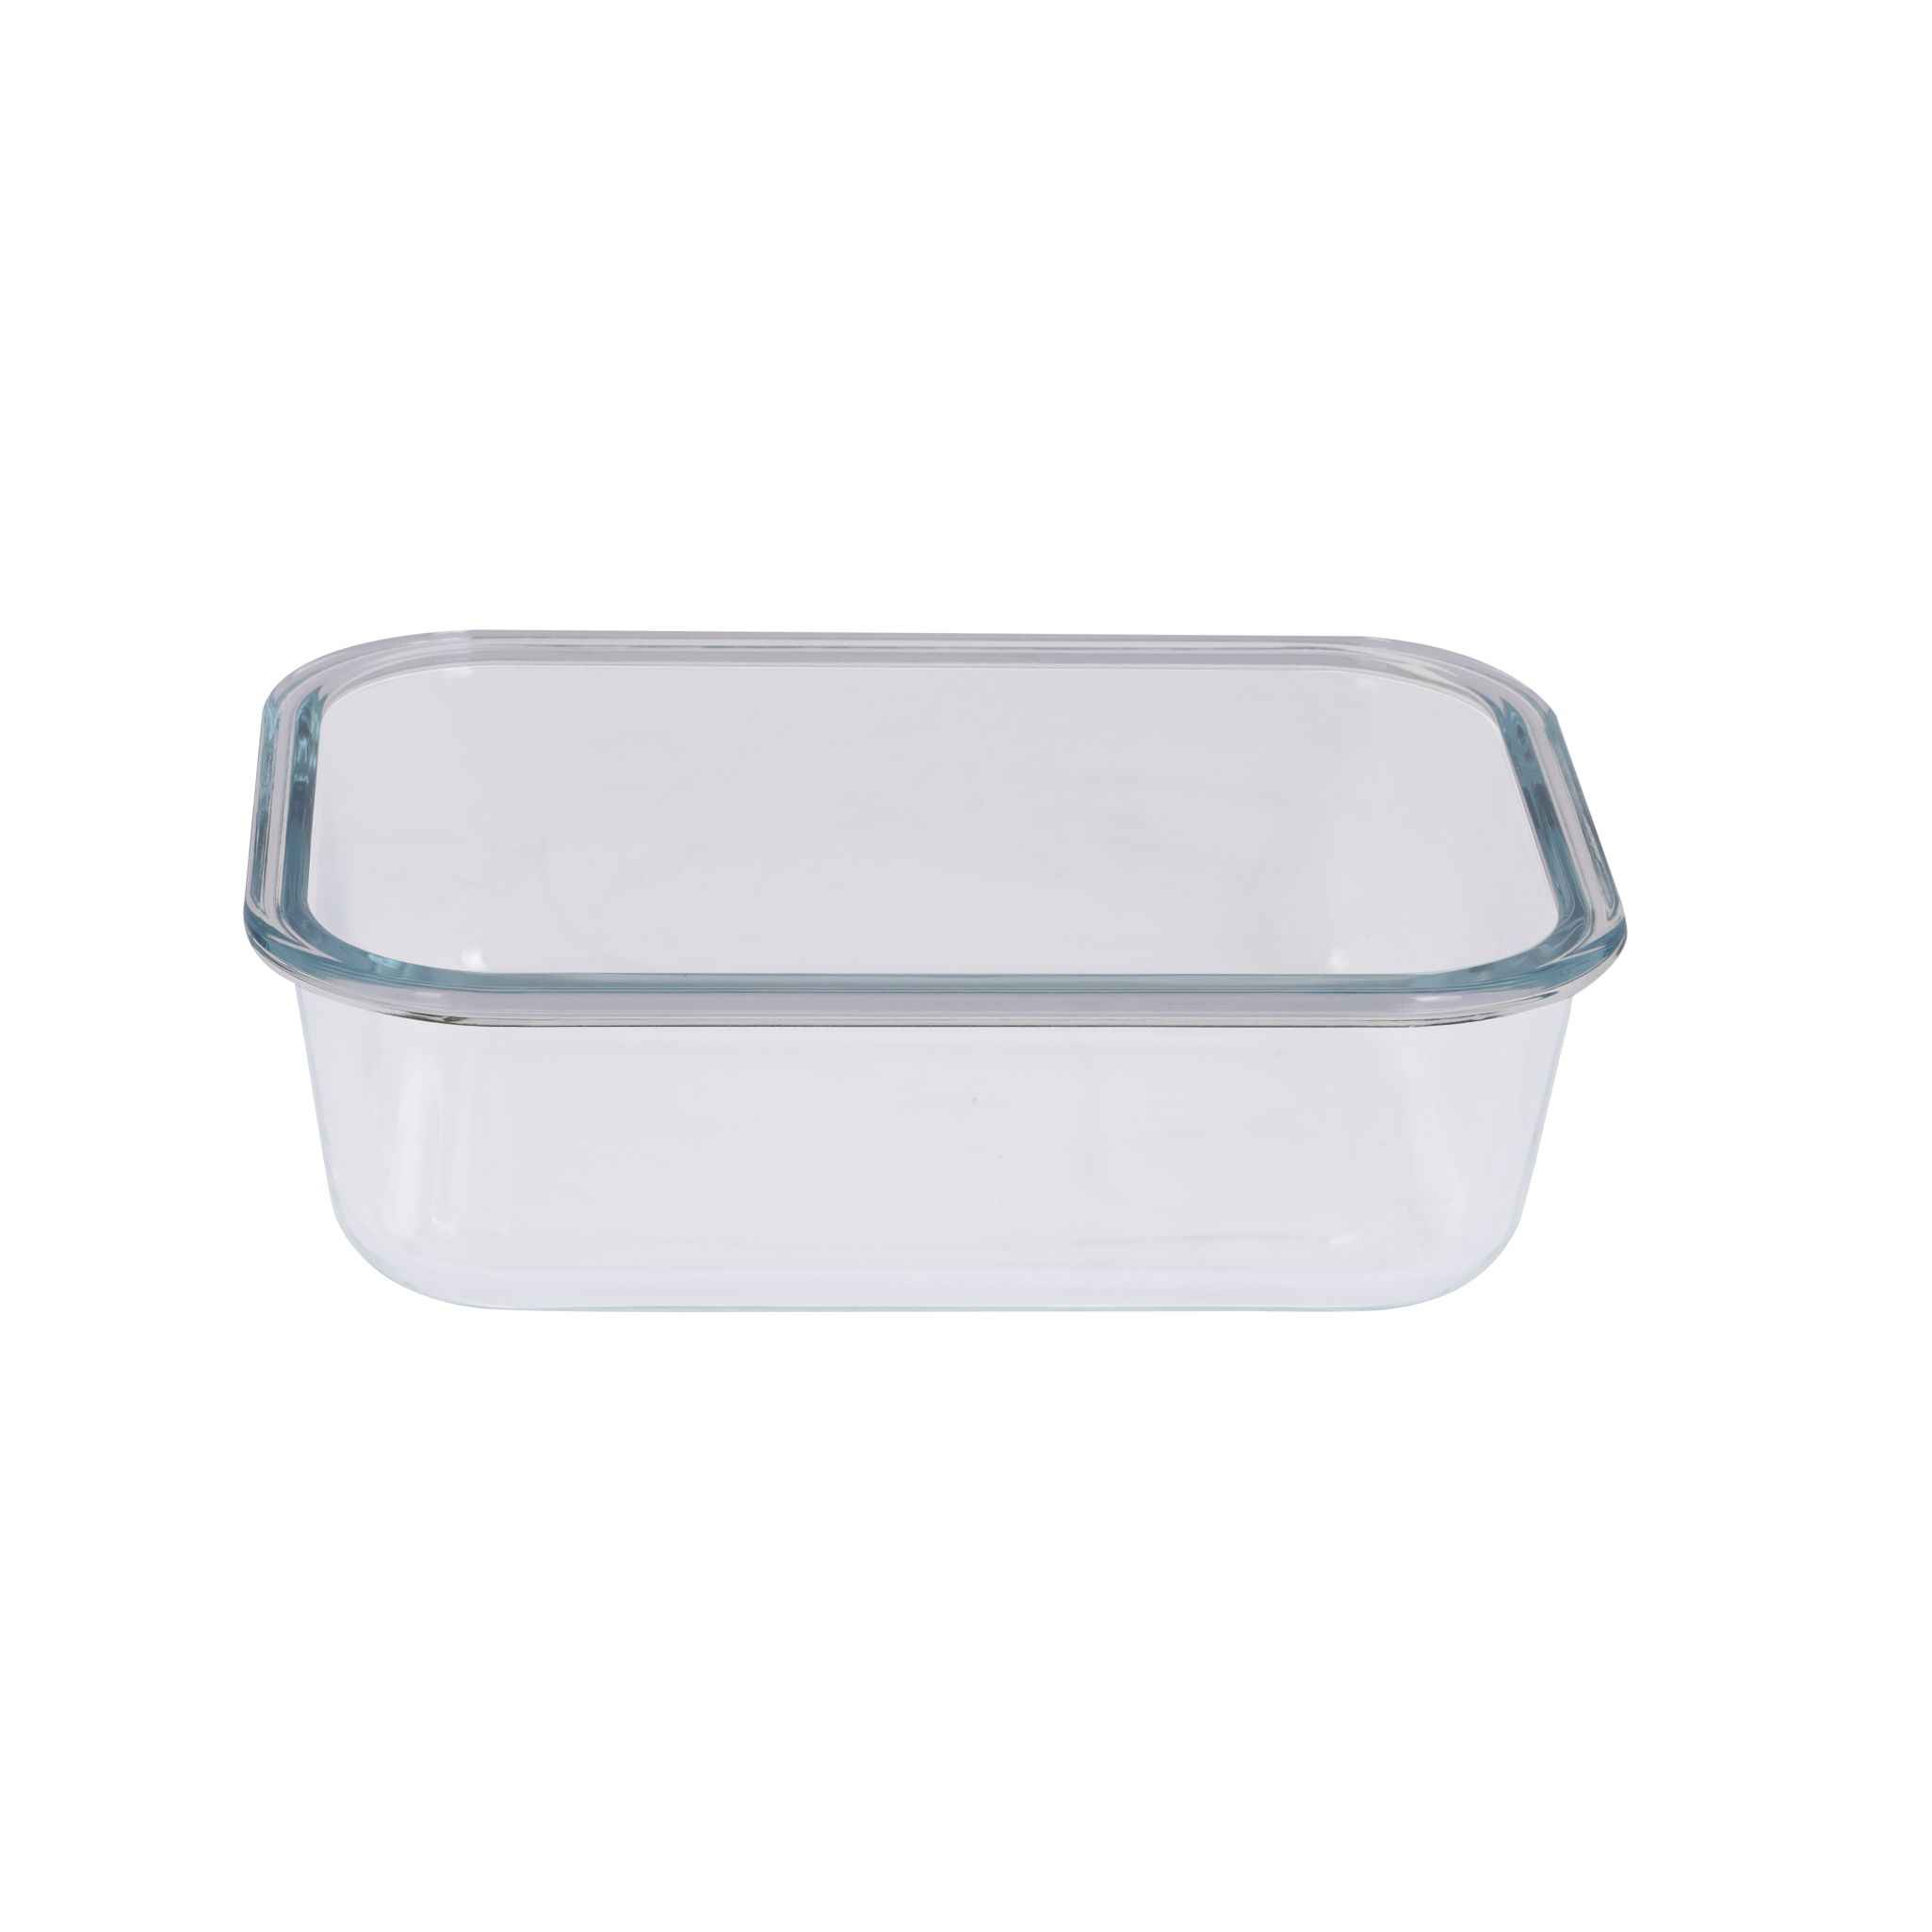 Royalford Rf9984 2Pcs Glass Airtight Container With Lids 1000Ml & 400Ml - Durable Heat Resistant Borosilicate Glass Dishwasher/Oven/Freezer Safe | Leak Proof Glass Meal Prep Containers